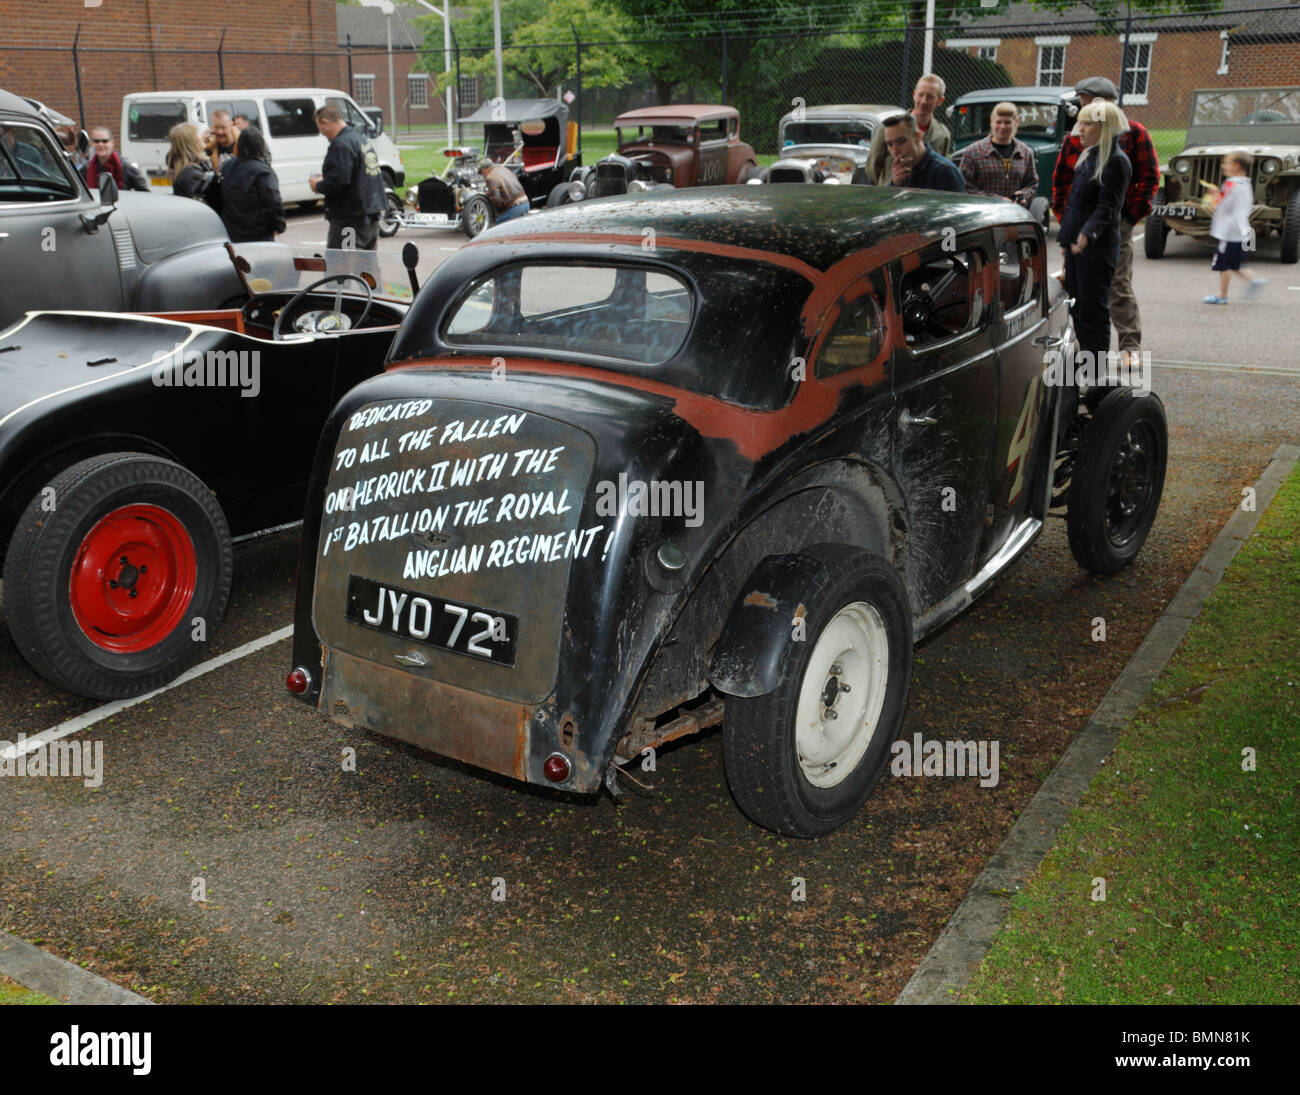 Hot Rod car rally. Old Morris Car with a dedication to fallen members of the Royal Anglian Regiment. Stock Photo